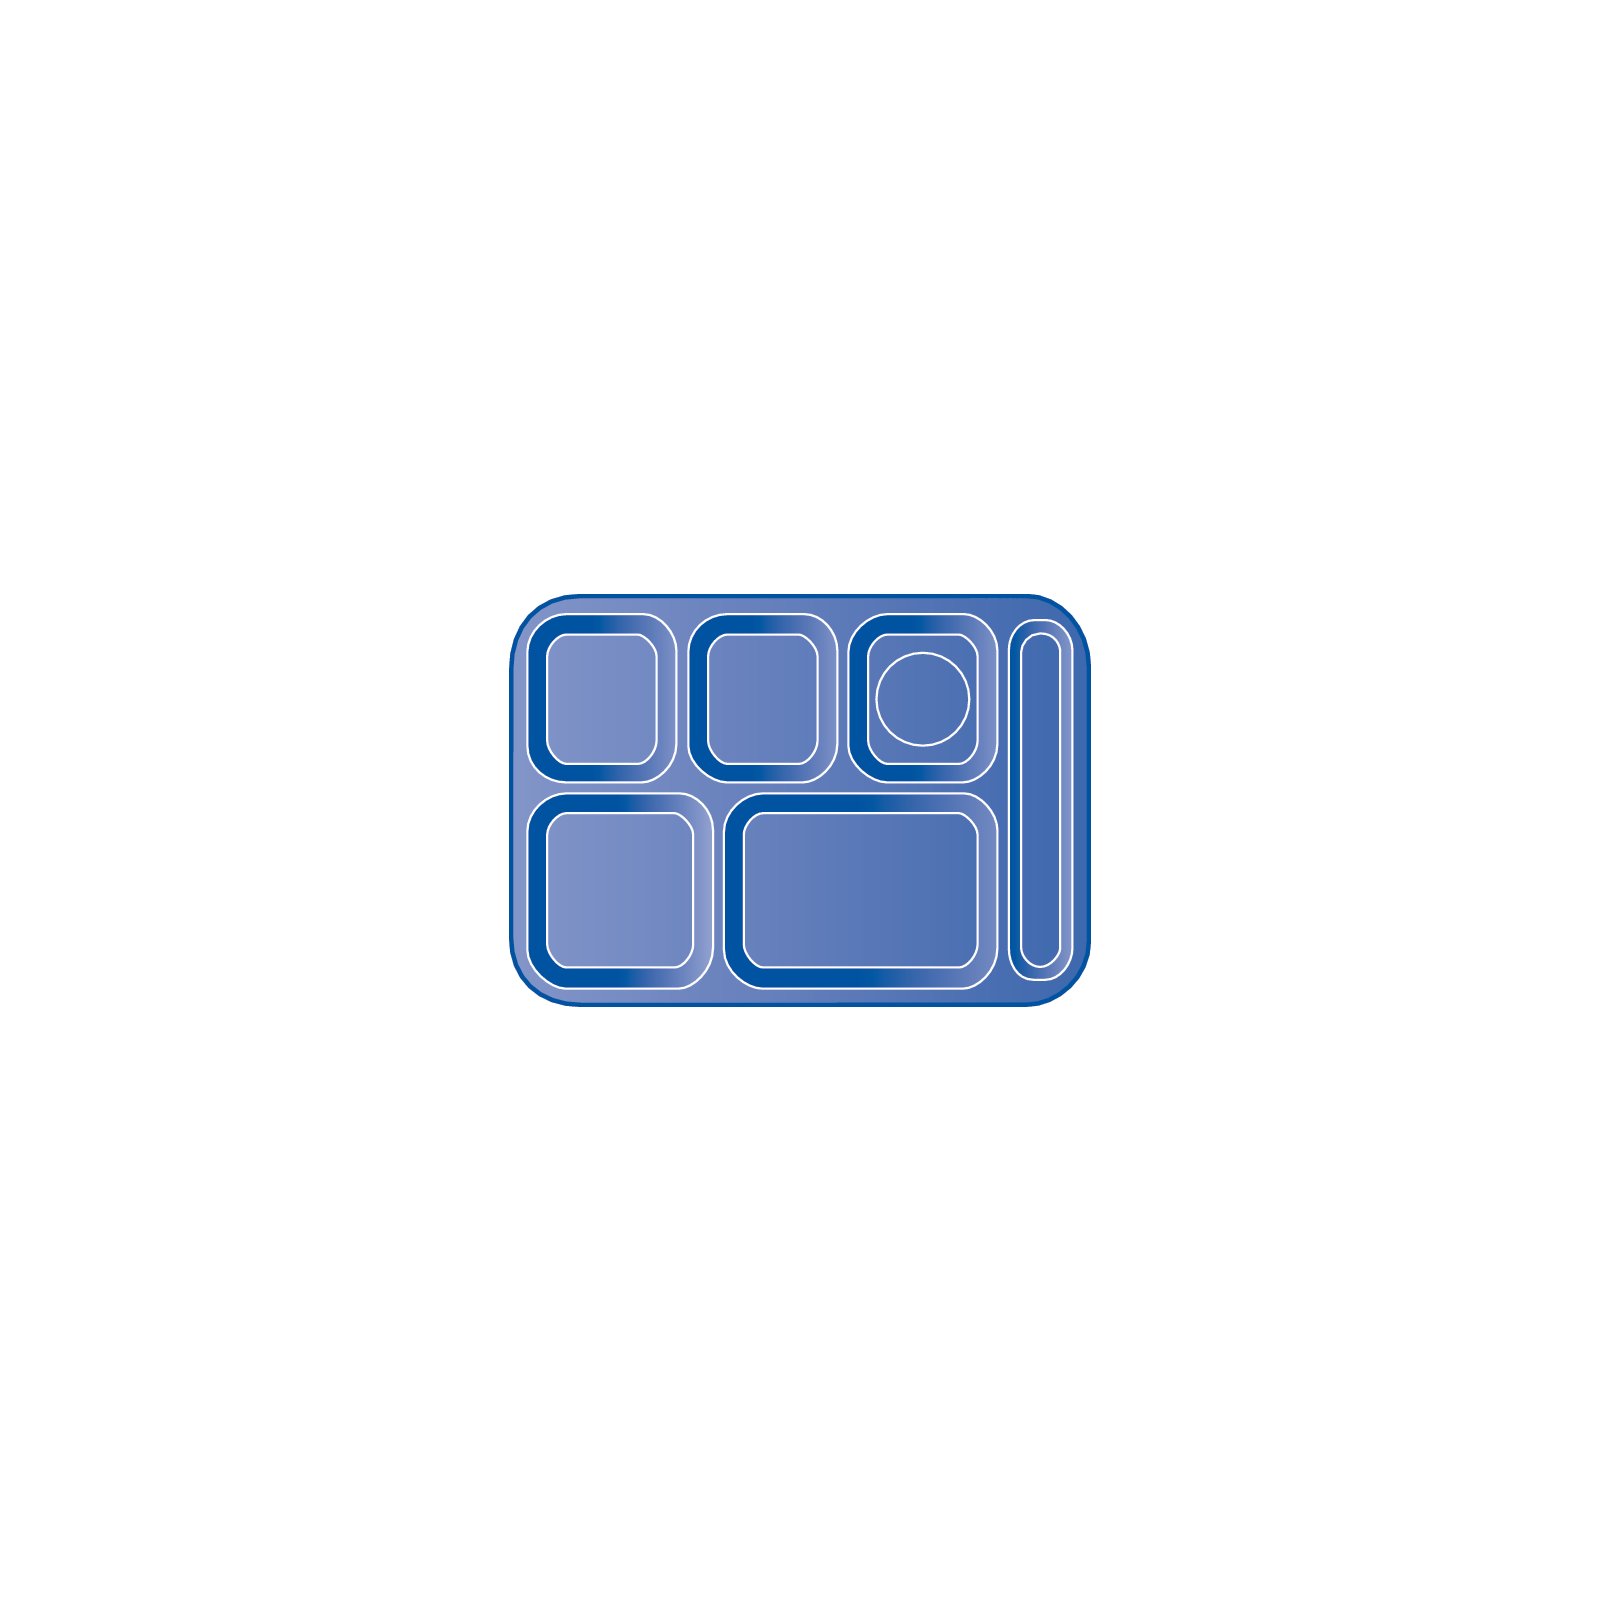 P614R05 - Right-Hand 6-Compartment Polypropylene Tray 10 x 14